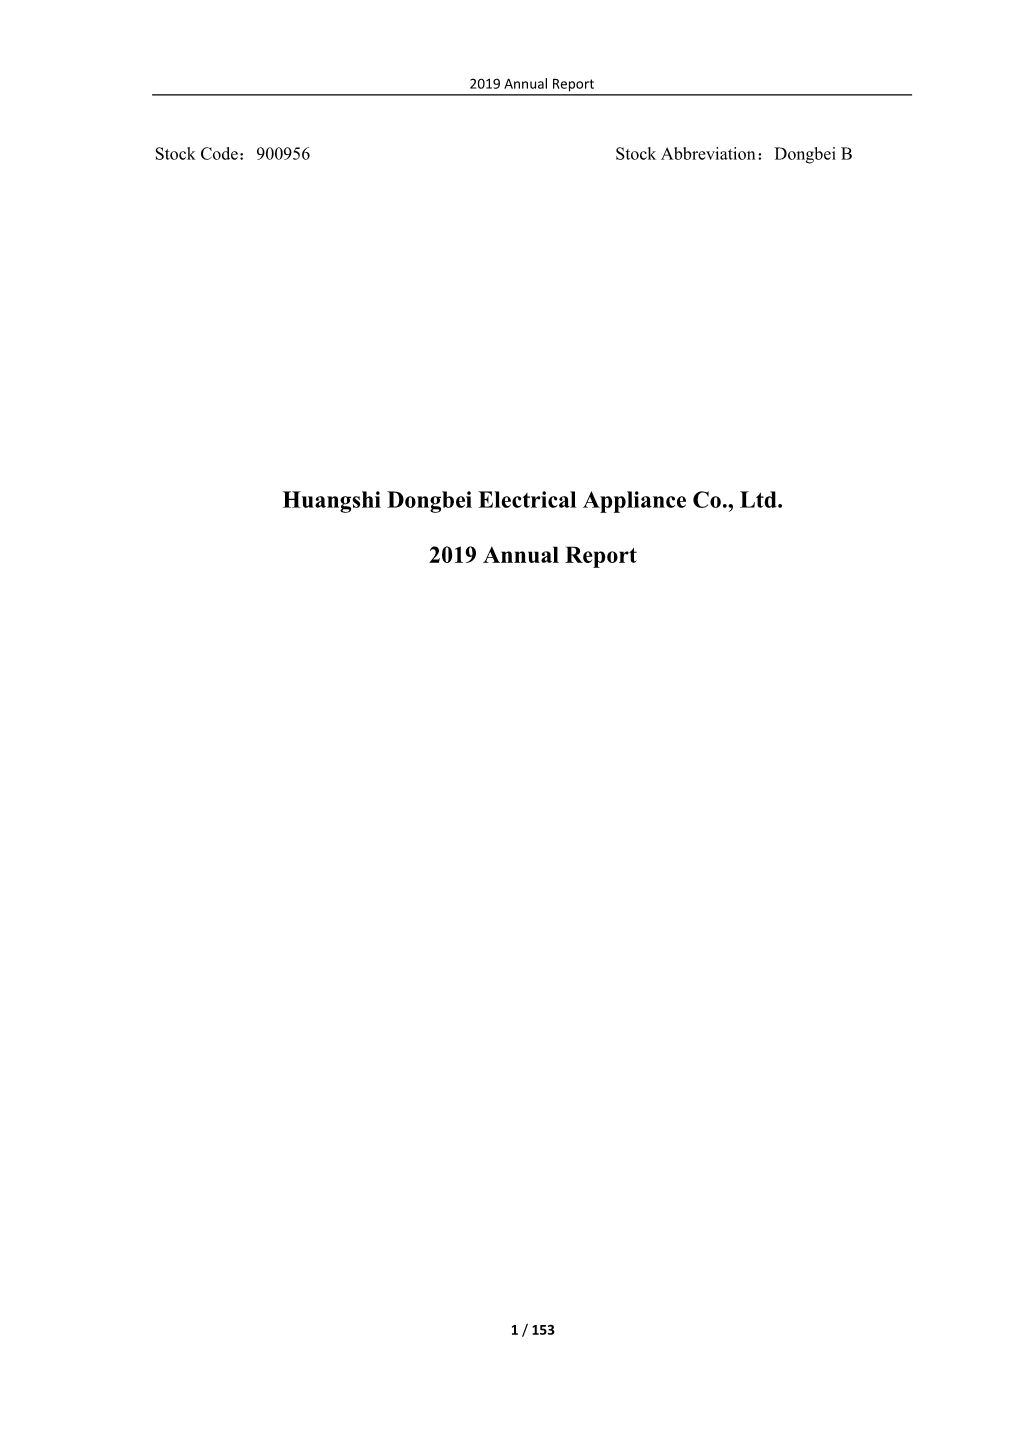 Huangshi Dongbei Electrical Appliance Co., Ltd. 2019 Annual